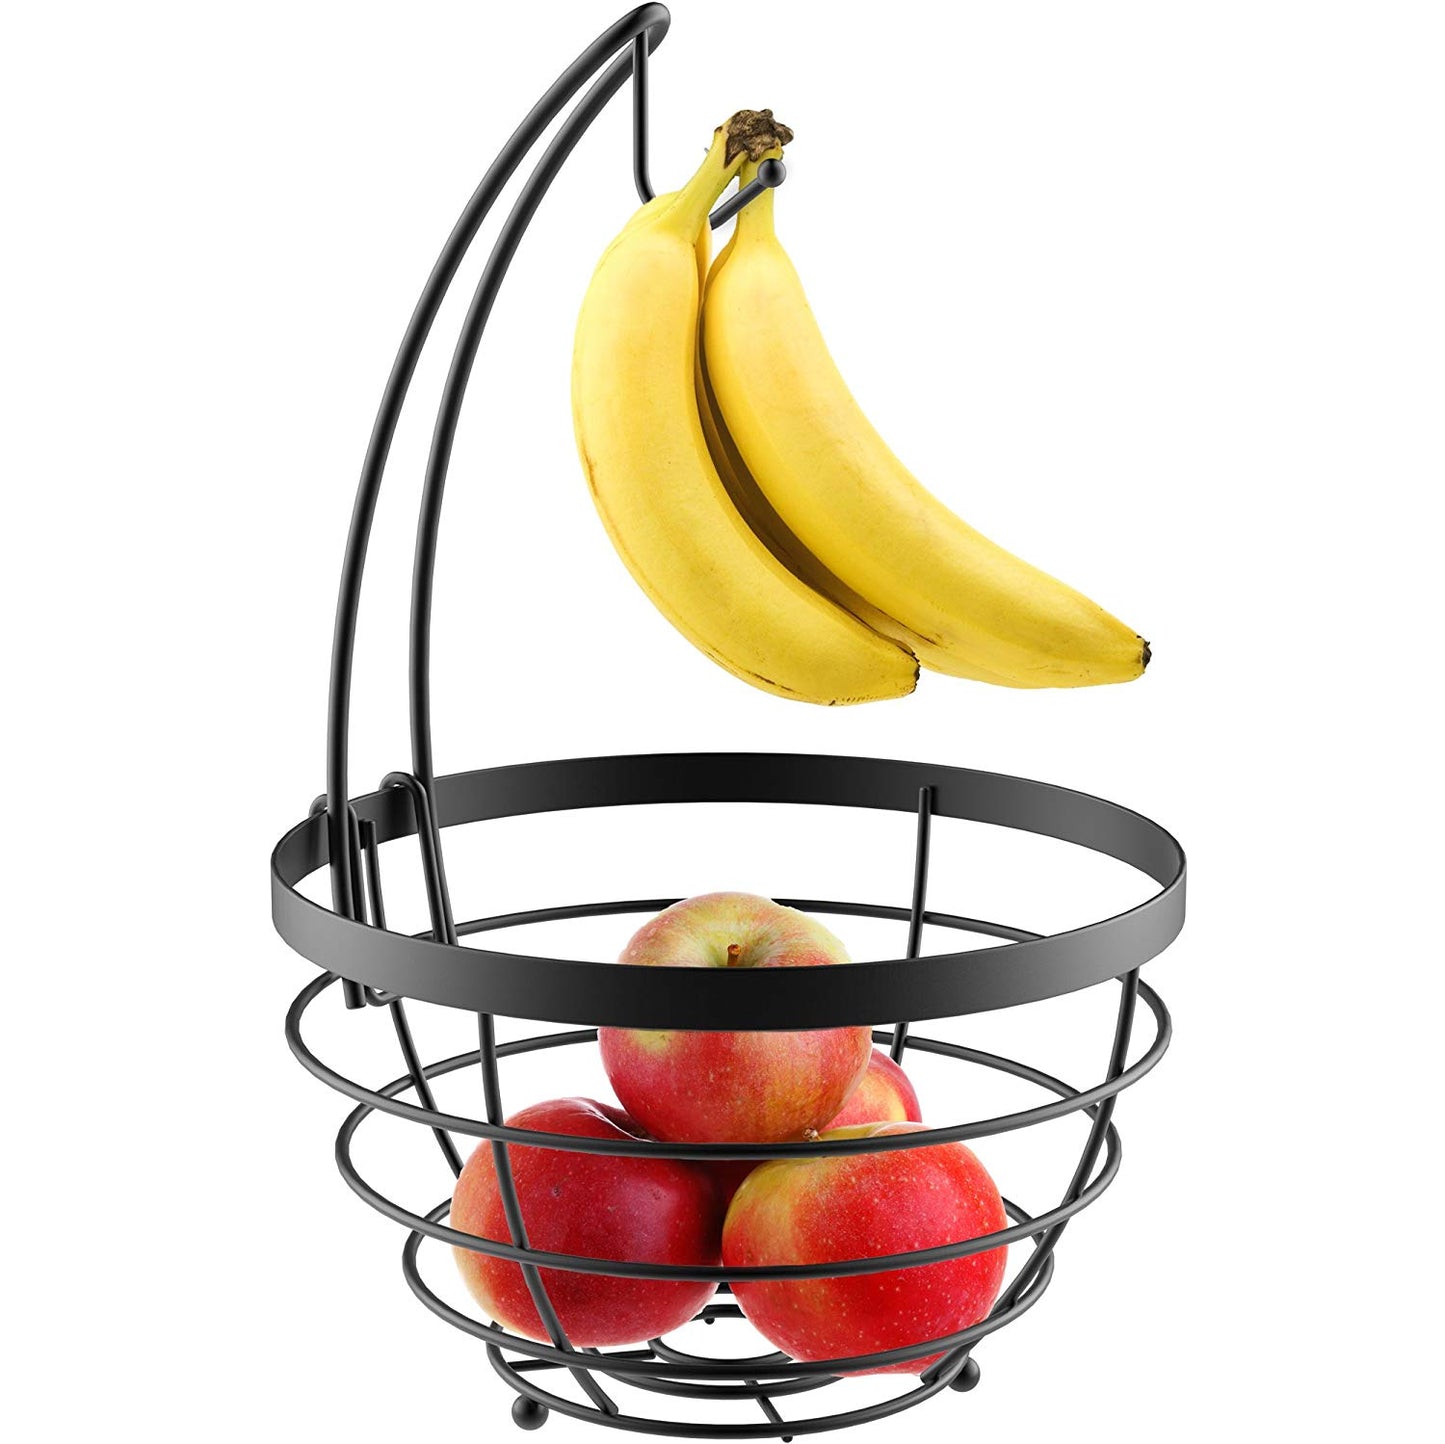 Vremi Fruit Basket for Kitchen - Wire Metal Fruit Bowl with Removable Banana Hanger - Round Baskets with Hanging Hook Holder in Black Decorative Modern Design - Fruits Storage for Countertop or Table